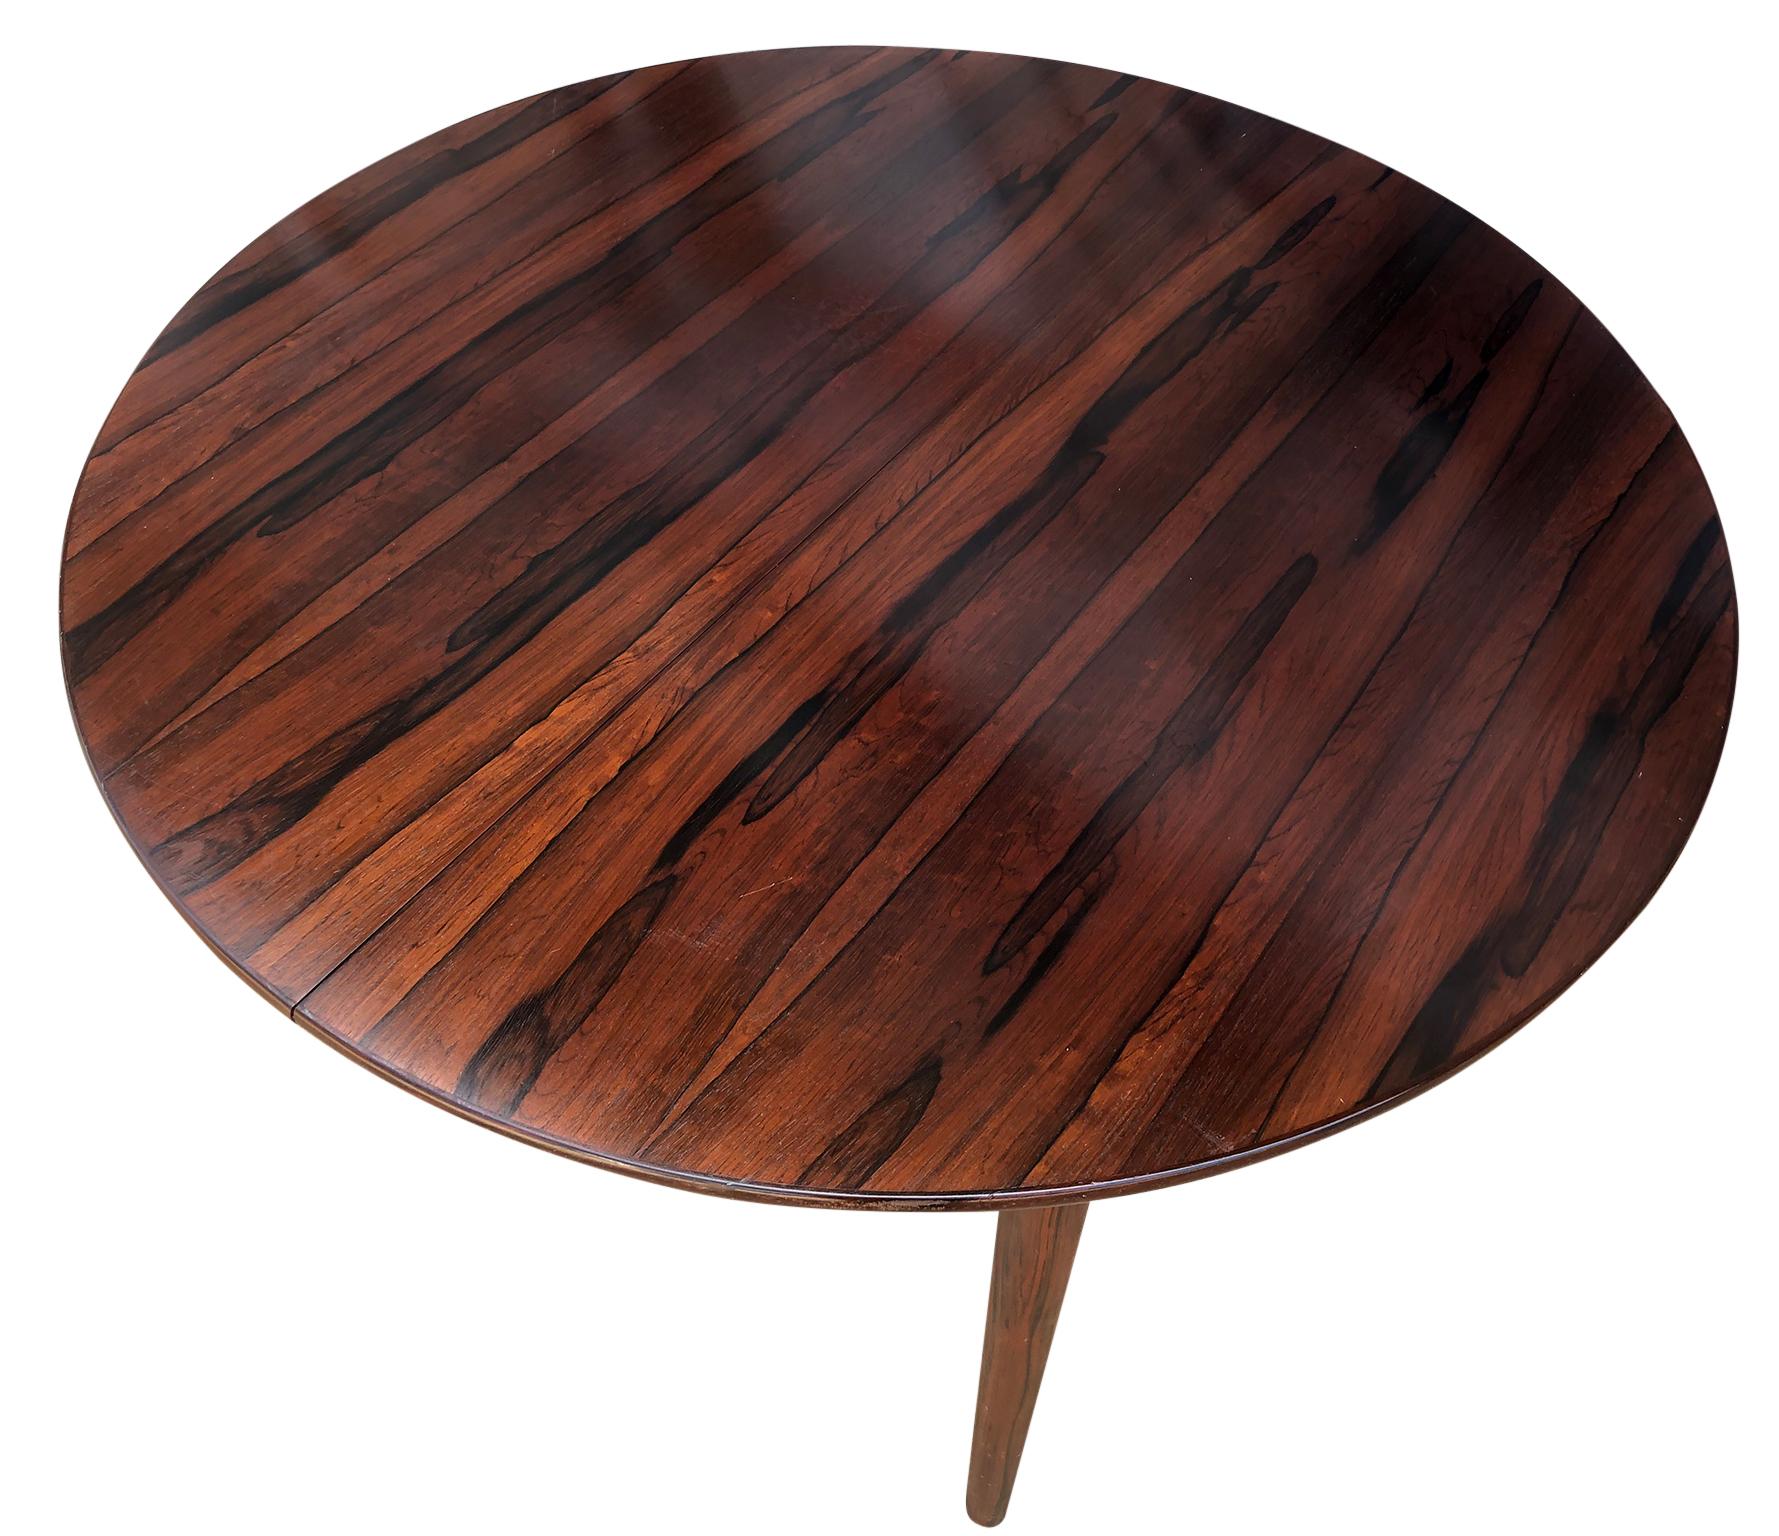 Midcentury rosewood expandable round dining table with 1 nesting leaf. This is a beautiful dining table Made in Denmark. Amazing solid rosewood legs. Made, circa 1960. Original finish in excellent condition. Documented and stamped under leaf AM